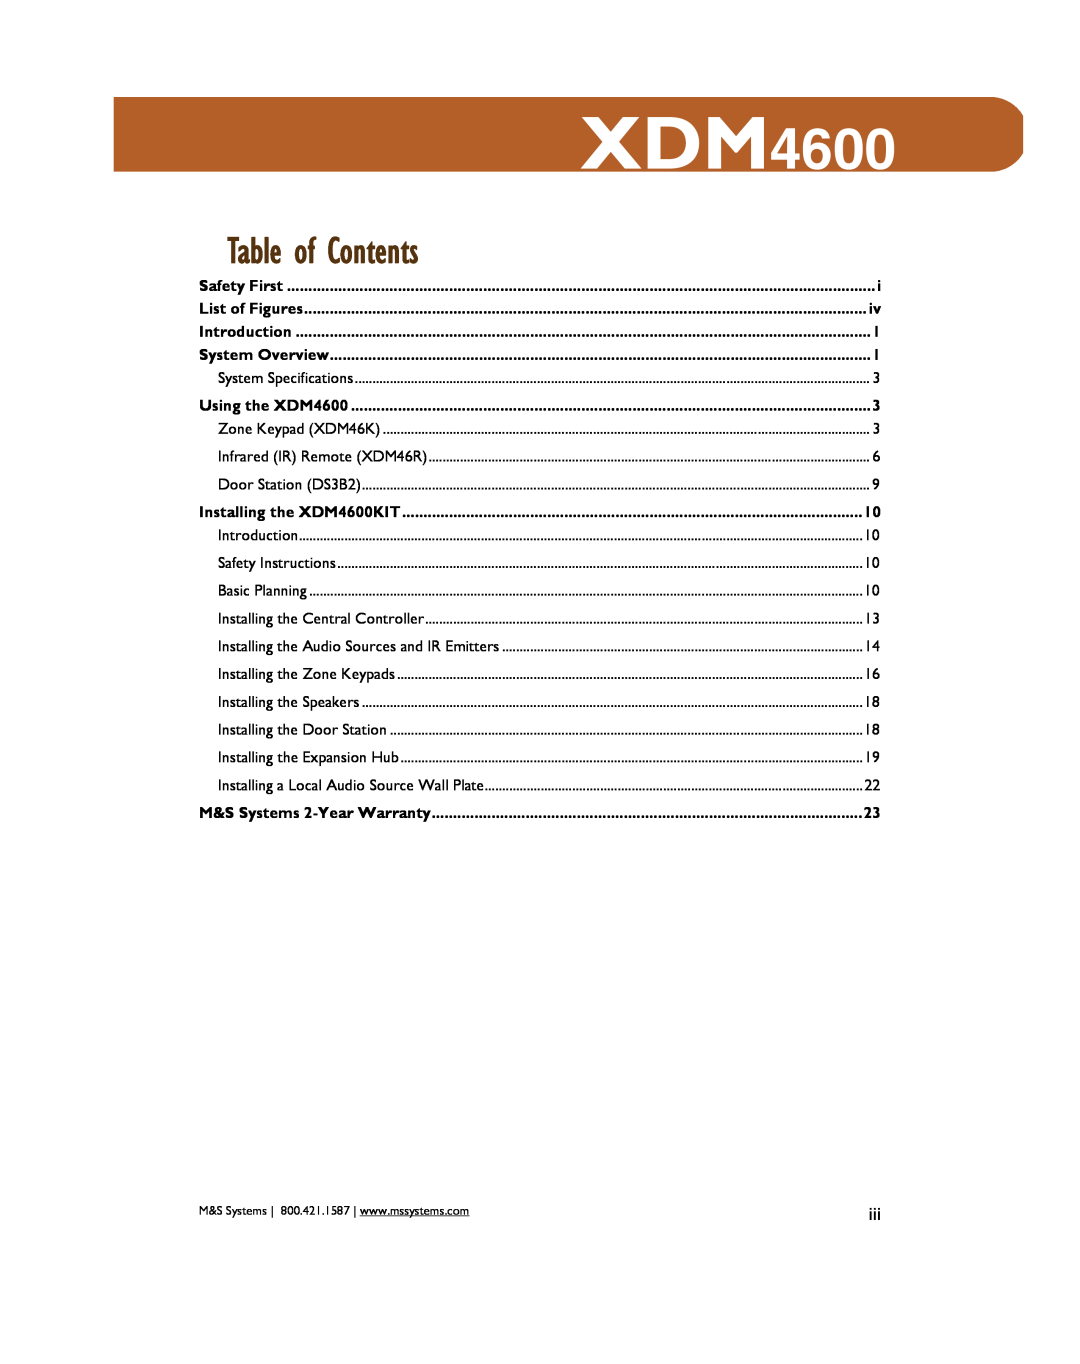 M&S Systems Table of Contents, Safety First, List of Figures, Introduction, System Overview, Using the XDM4600 